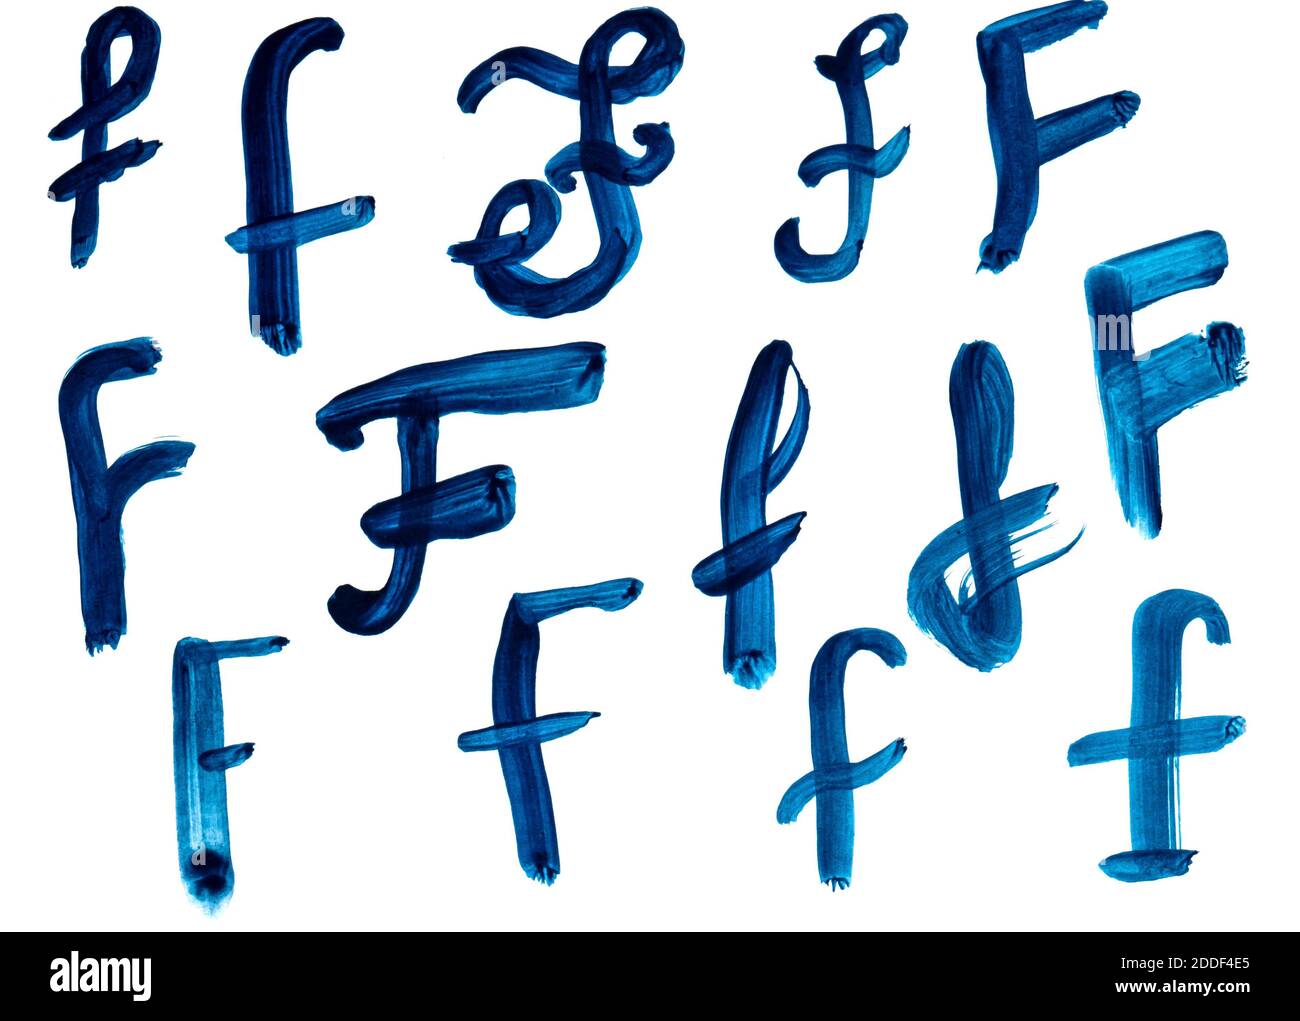 The letter F is drawn in different versions. Stock Photo